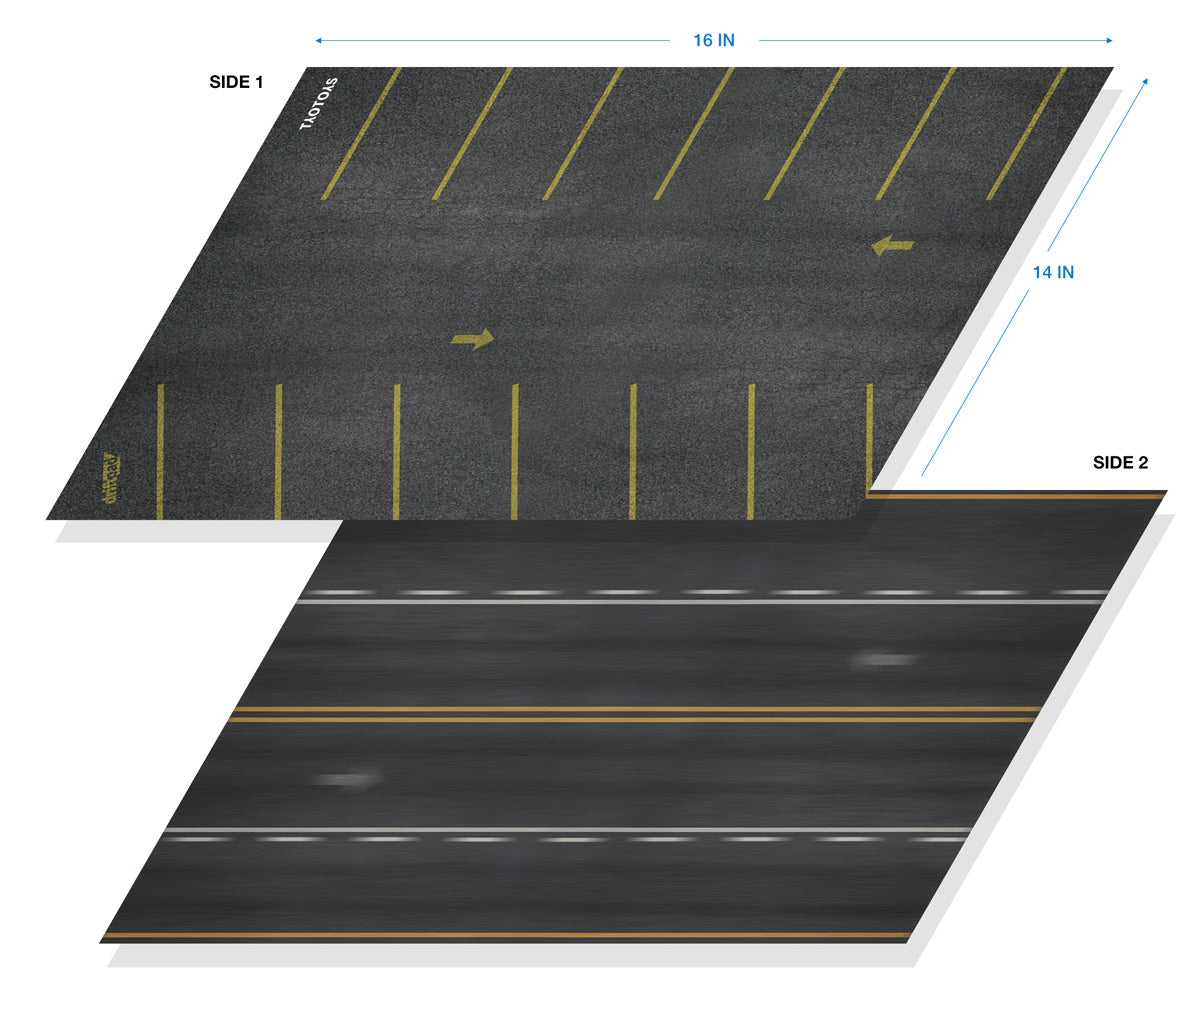 Driftpad Build Material: Speed Lanes